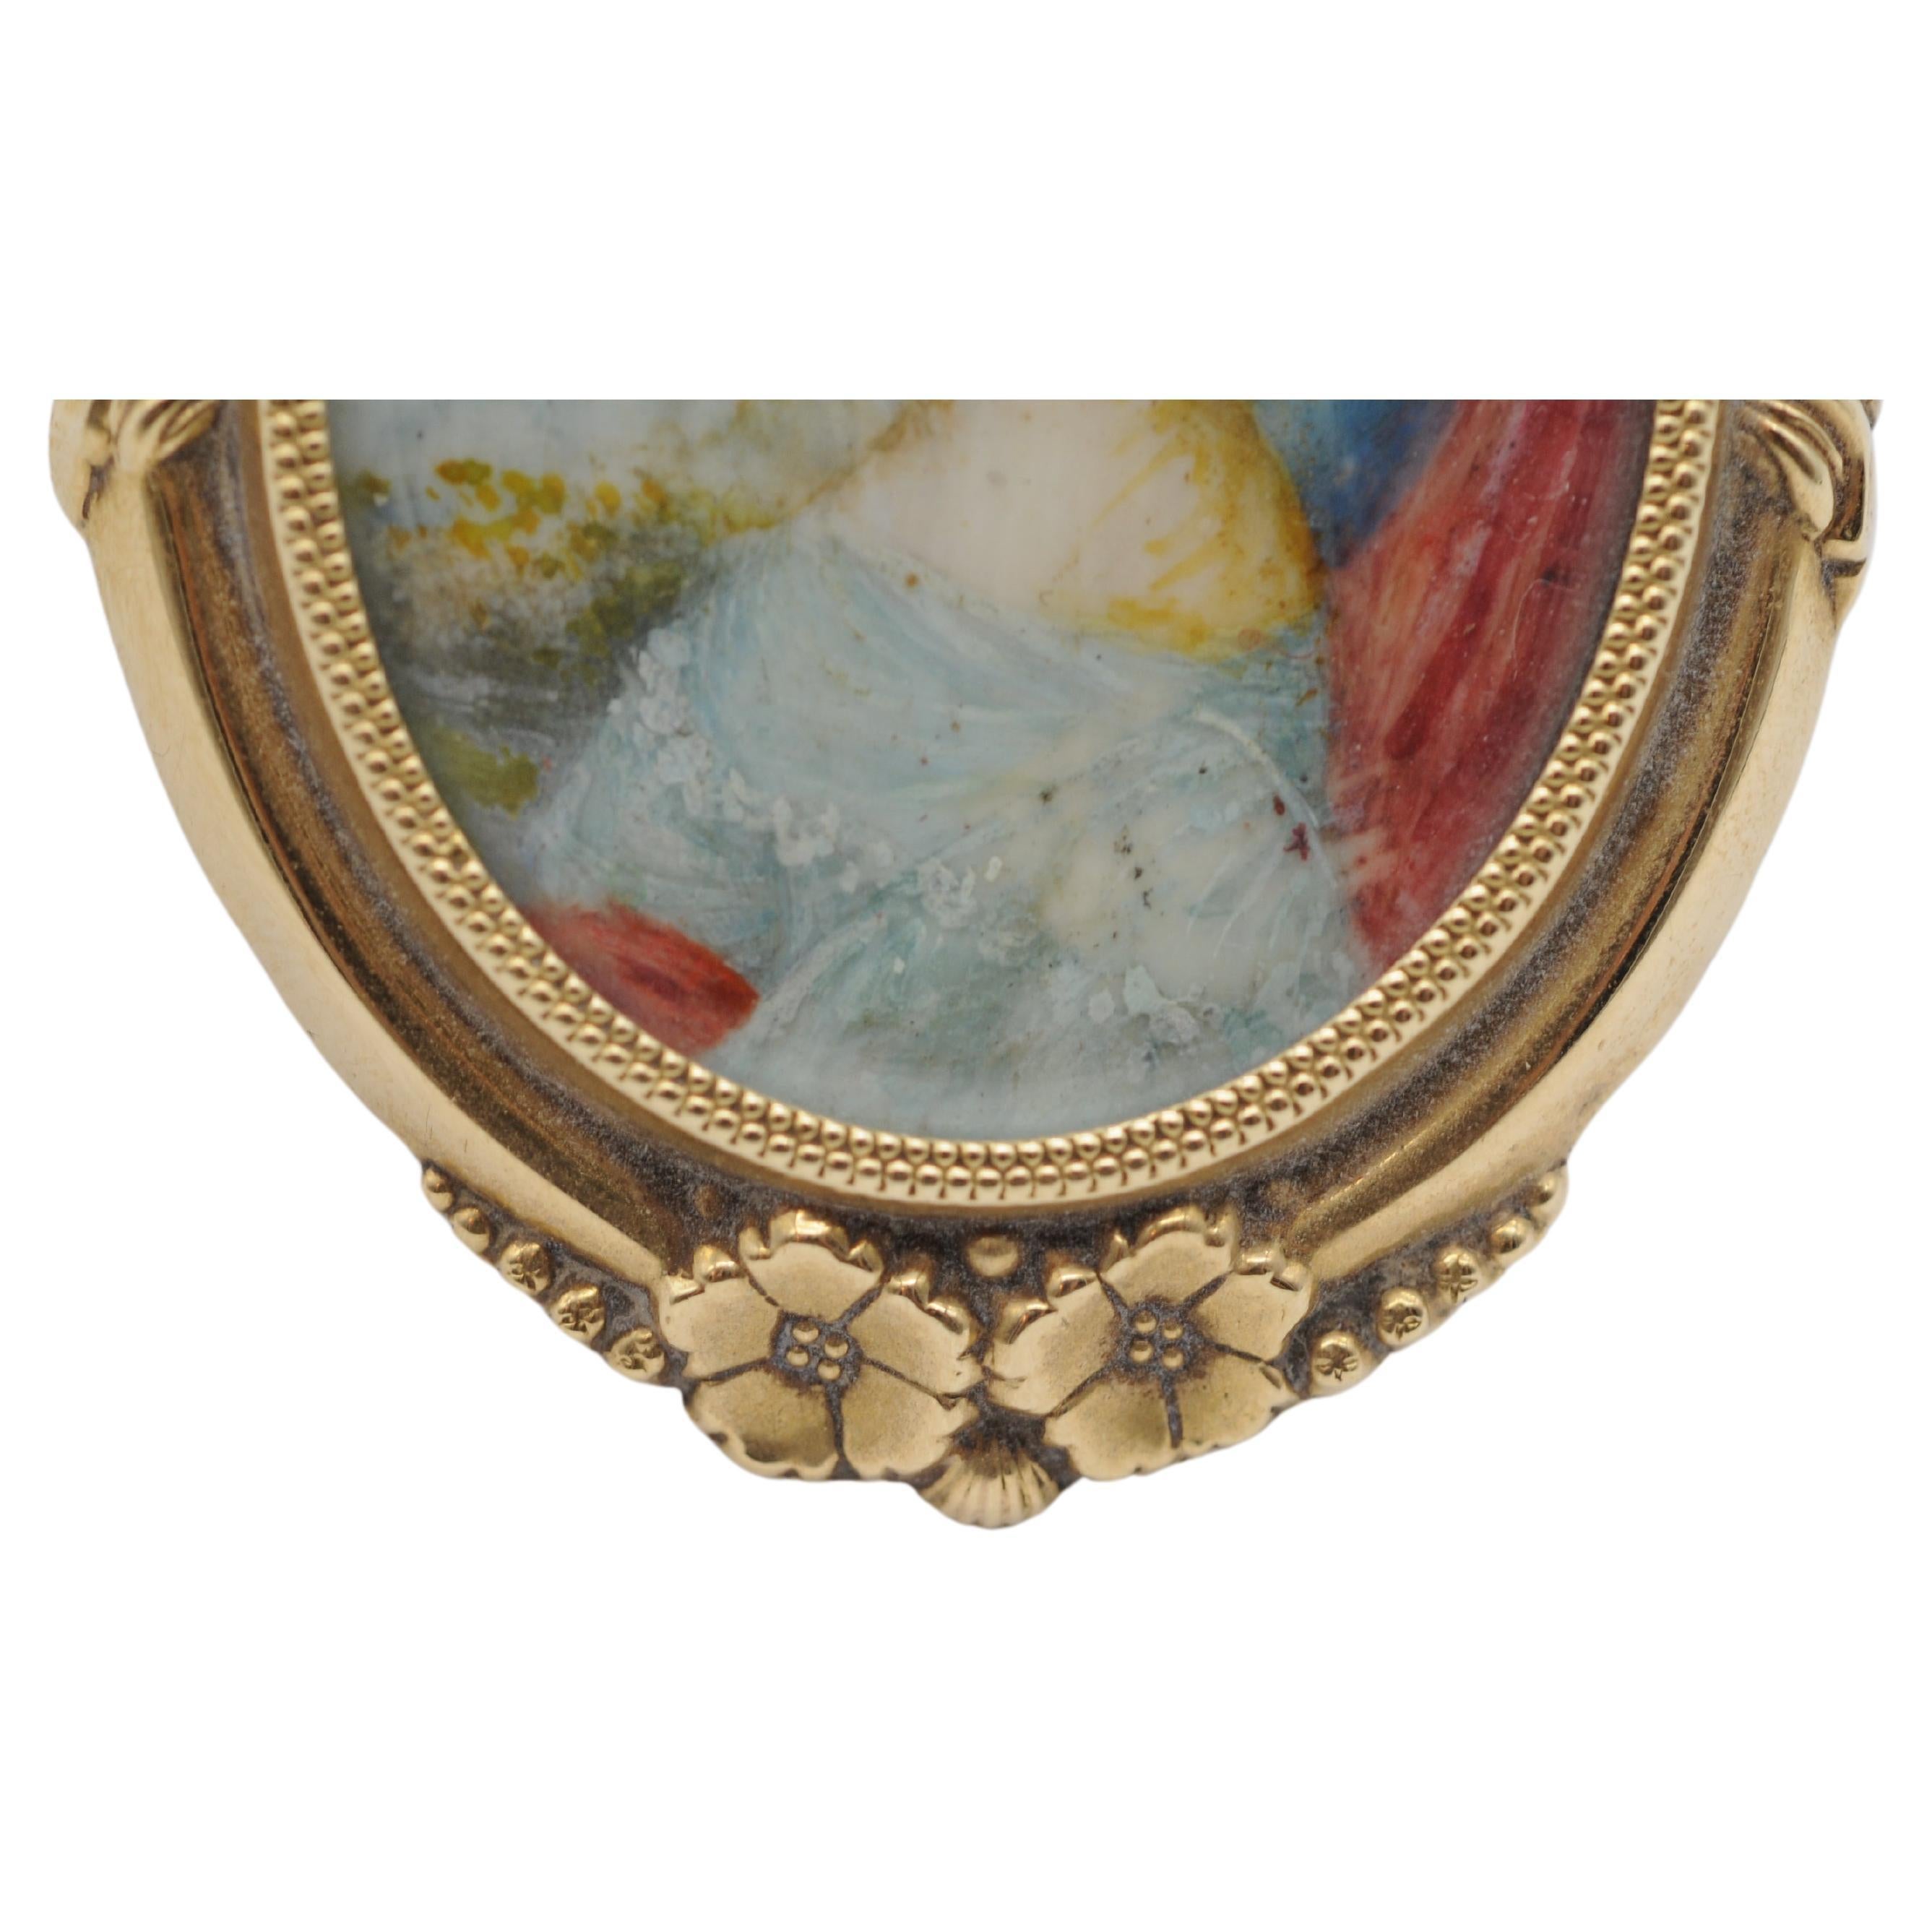 Women's or Men's Biedermeir brooch 14k gold with a view of a woman For Sale